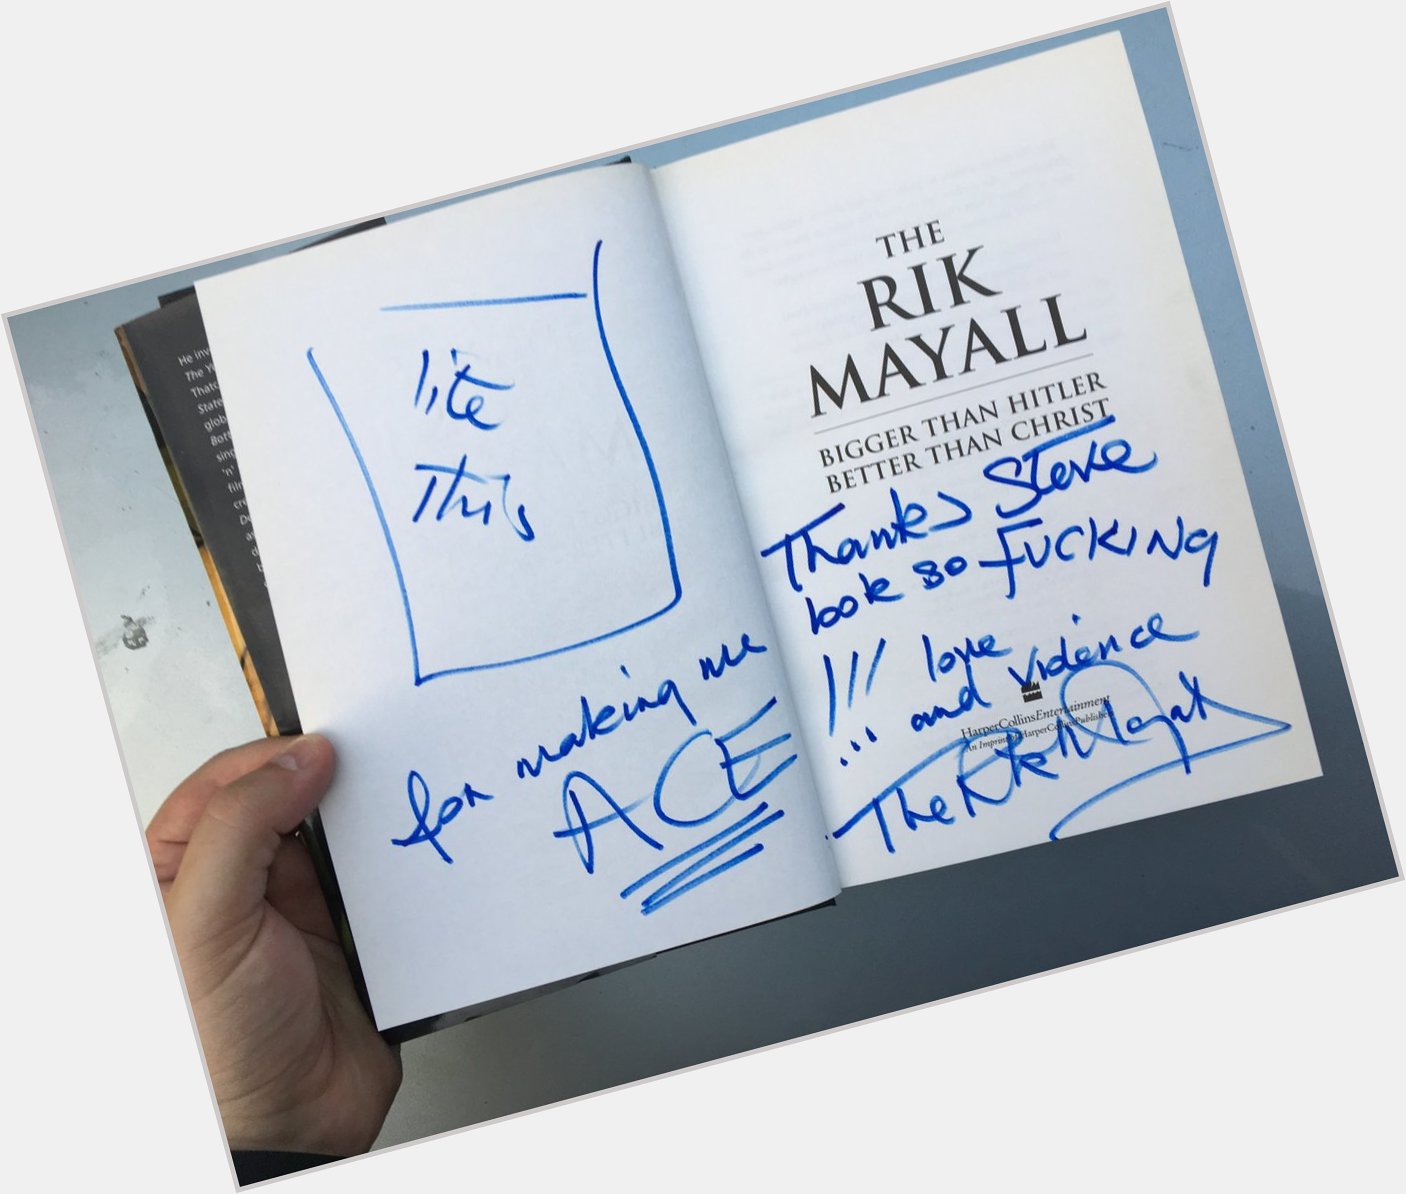 Happy birthday, Rik Mayall. Thanks for making my book look so fucking ACE! 